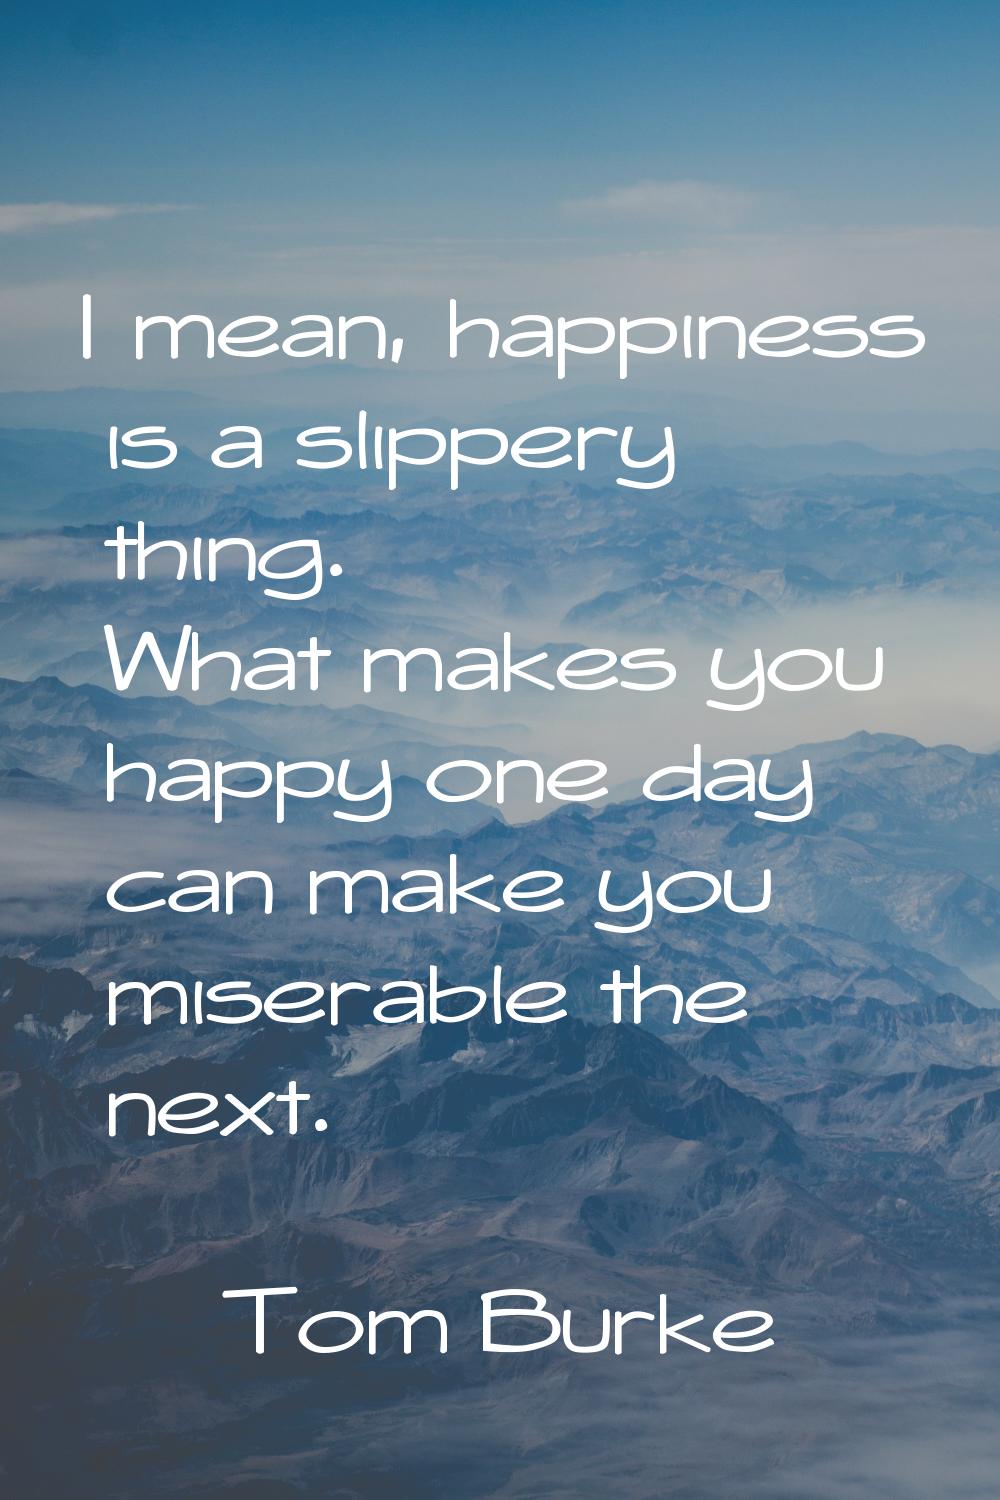 I mean, happiness is a slippery thing. What makes you happy one day can make you miserable the next